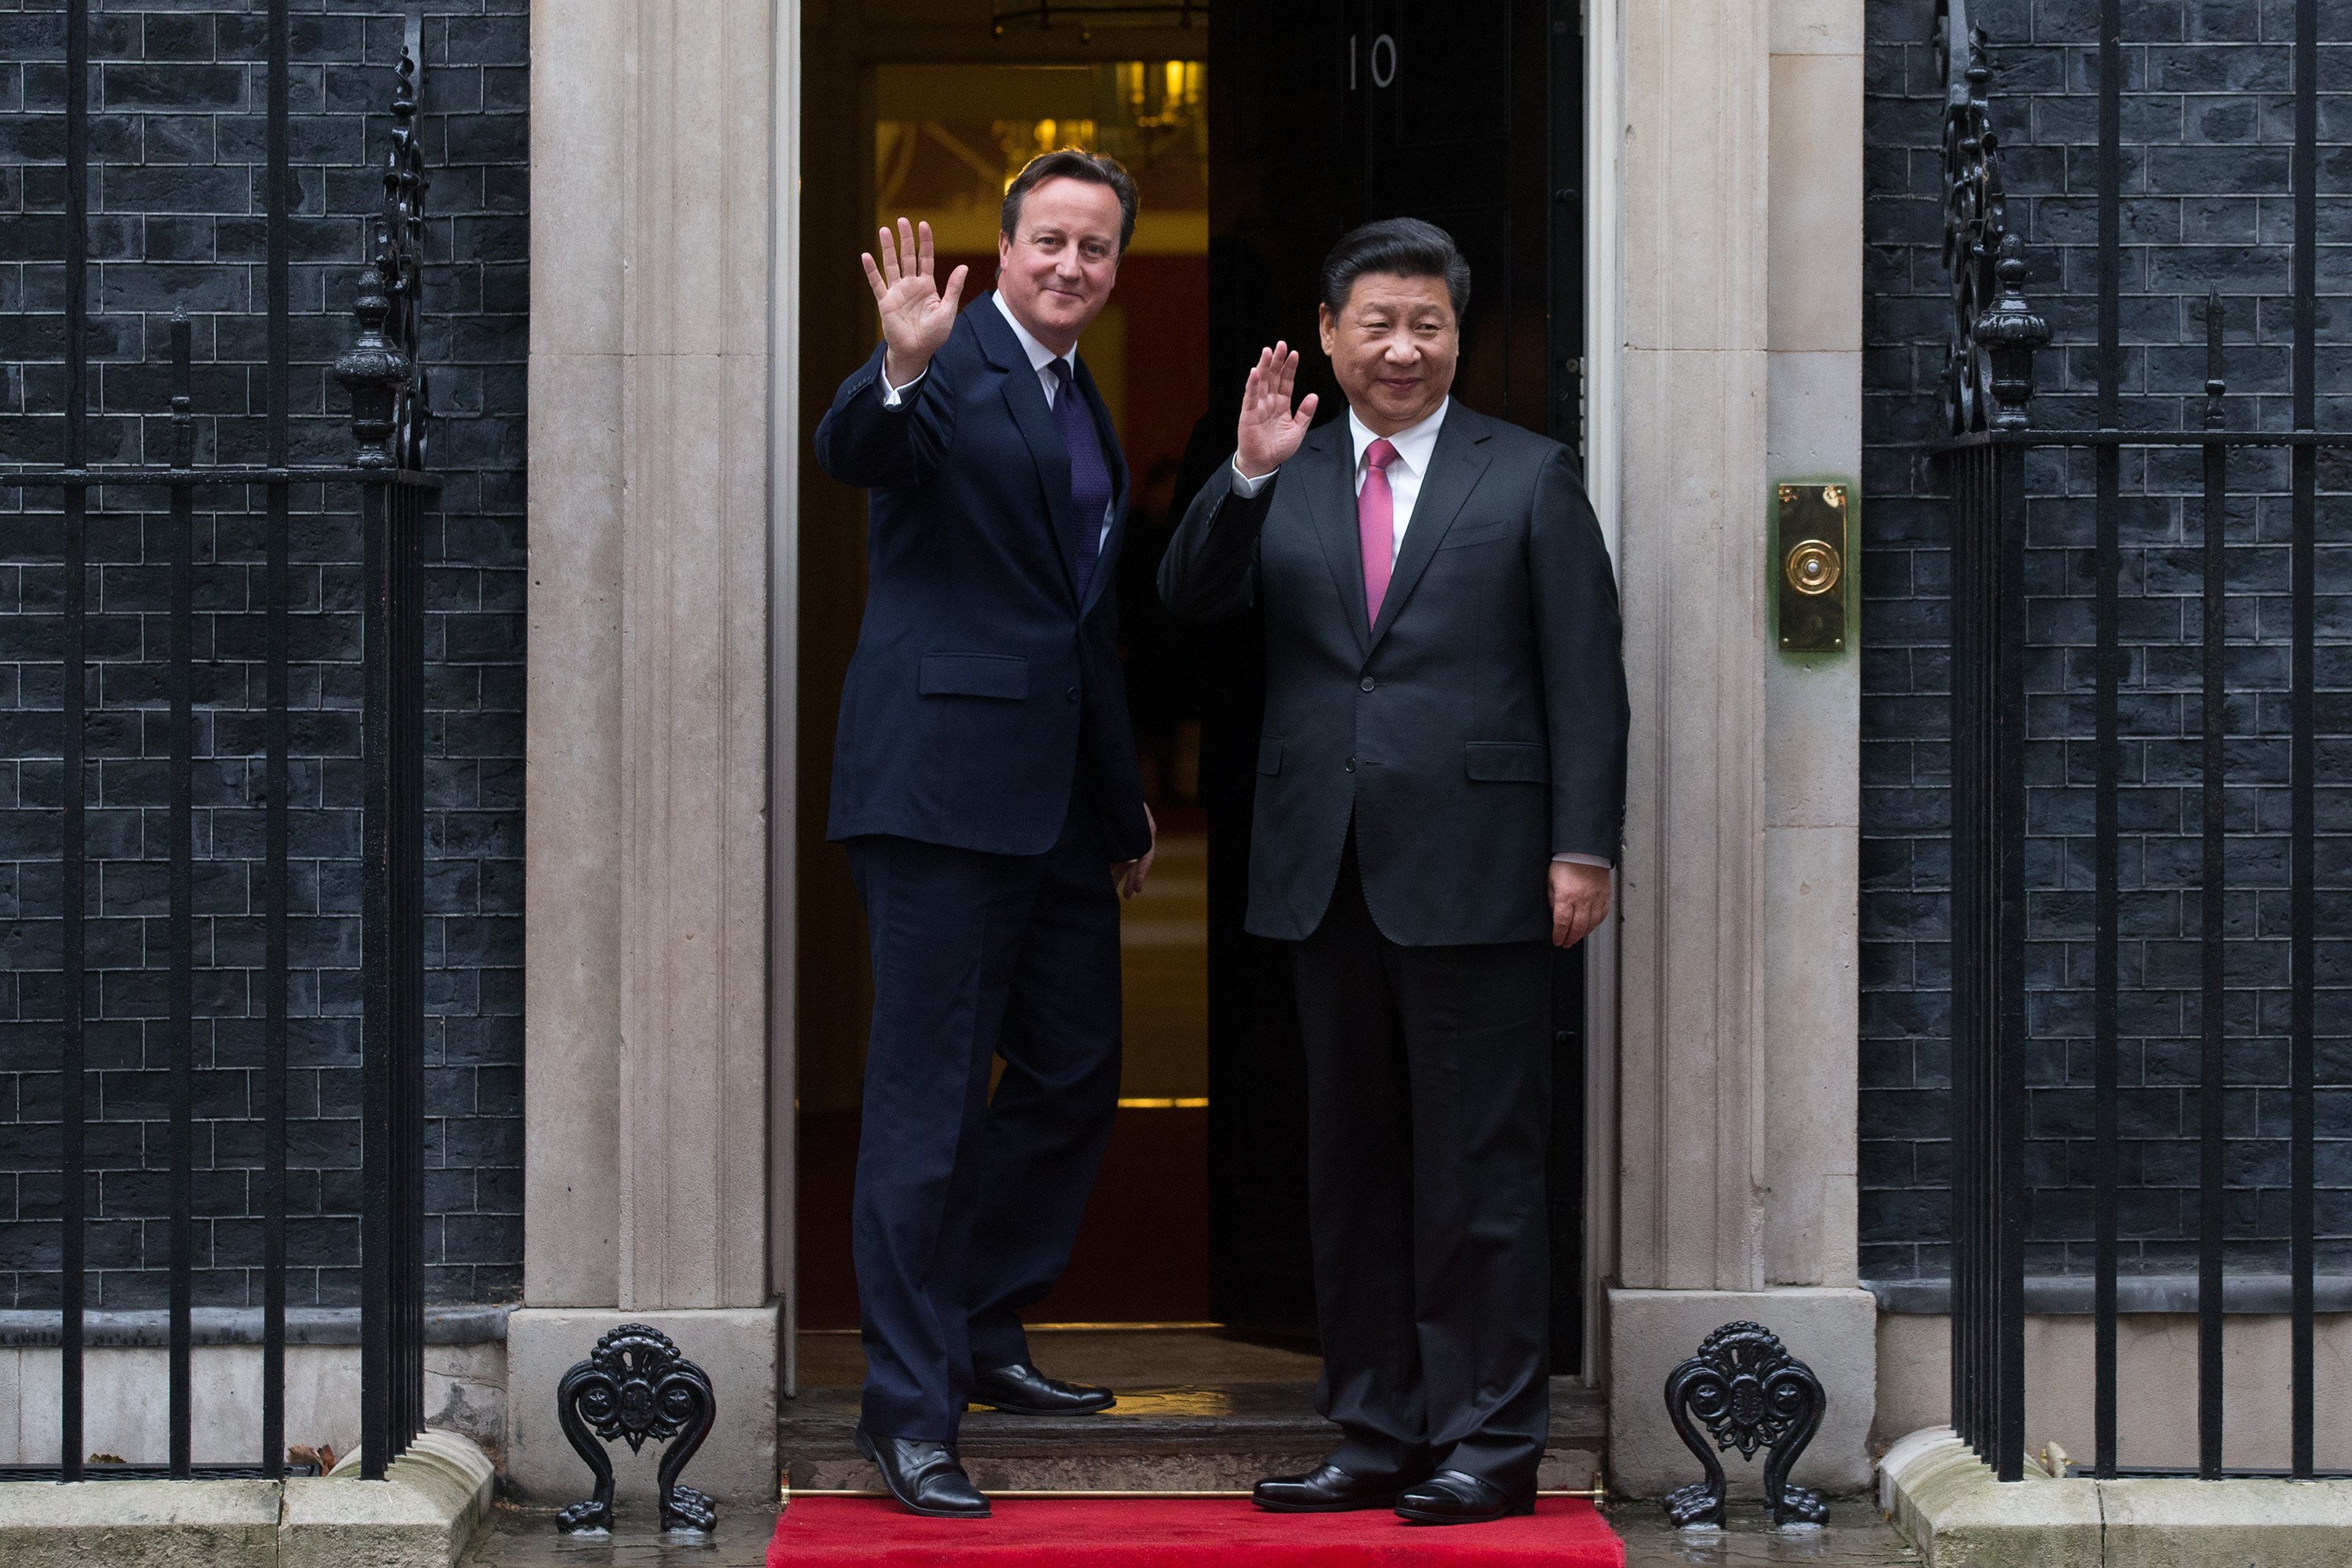 David Cameron greets Xi Jinping as he arrives in Downing Street on Oct. 21, 2015 in London. (Carl Court—Getty Images)